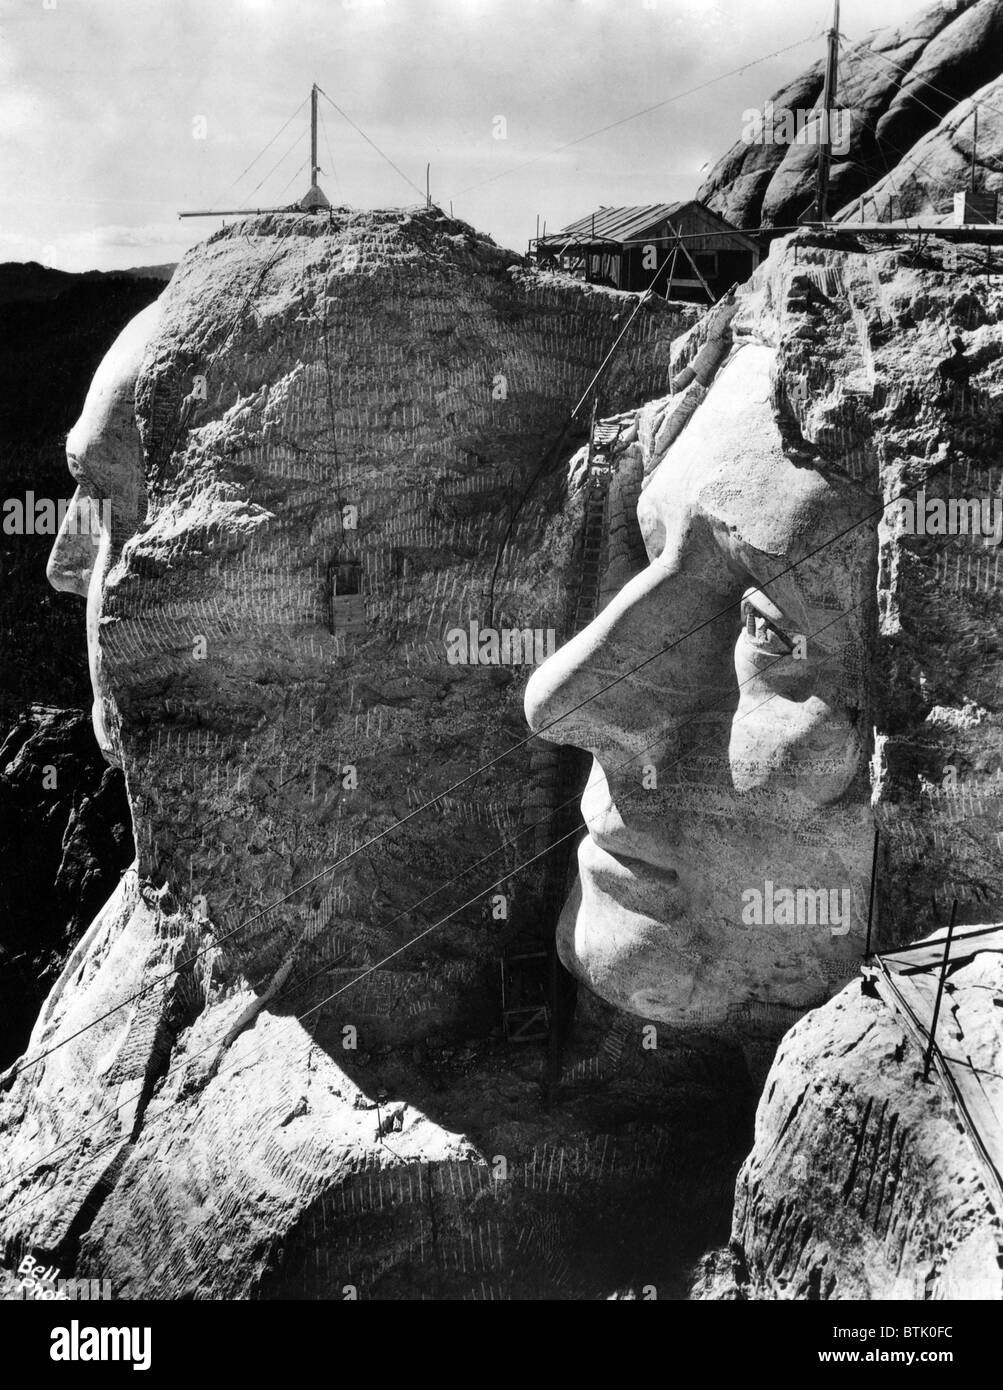 MOUNT RUSHMORE, operations to resume in April after halting for winter. View shows completed profiles of George Washington (l) a Stock Photo